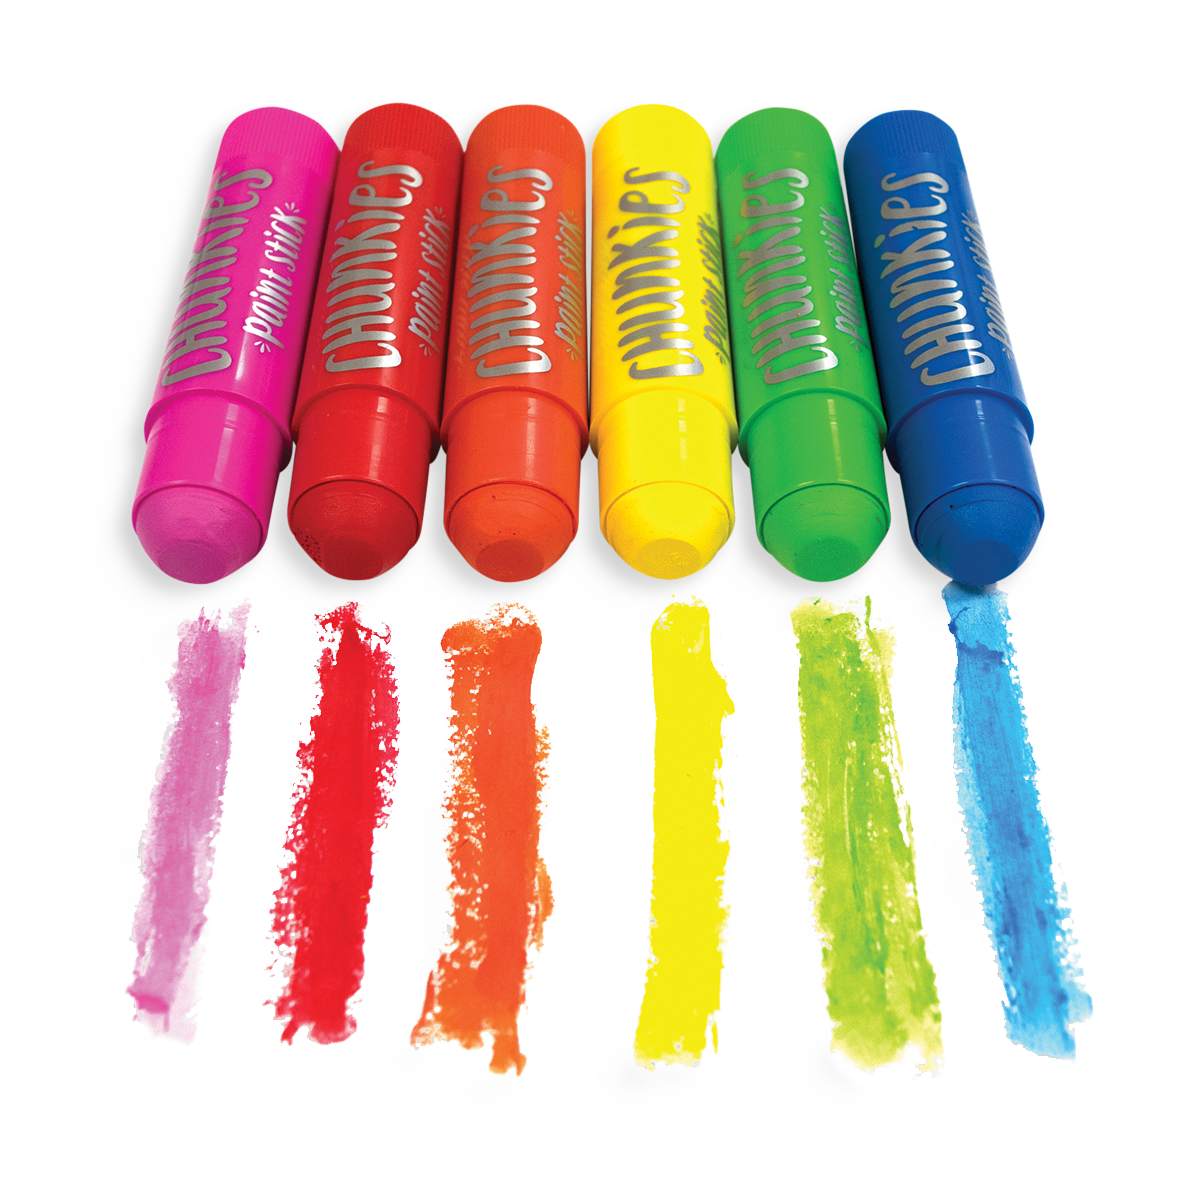 6 colors of OOLY Chunkies Paint Sticks in a row